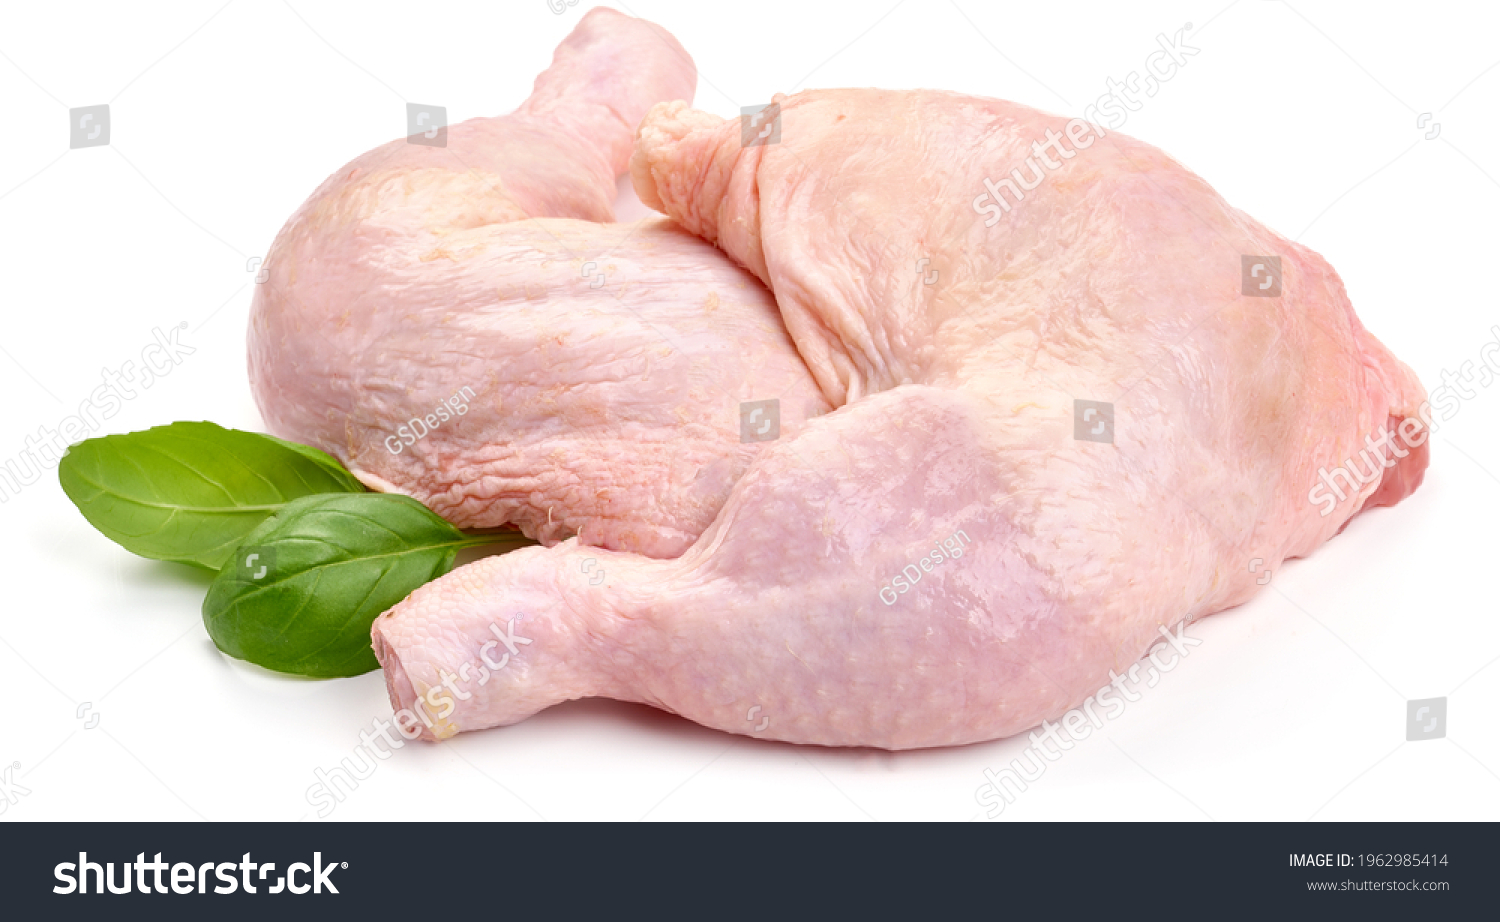 Raw chicken leg quarters, isolated on white background. High resolution image. #1962985414